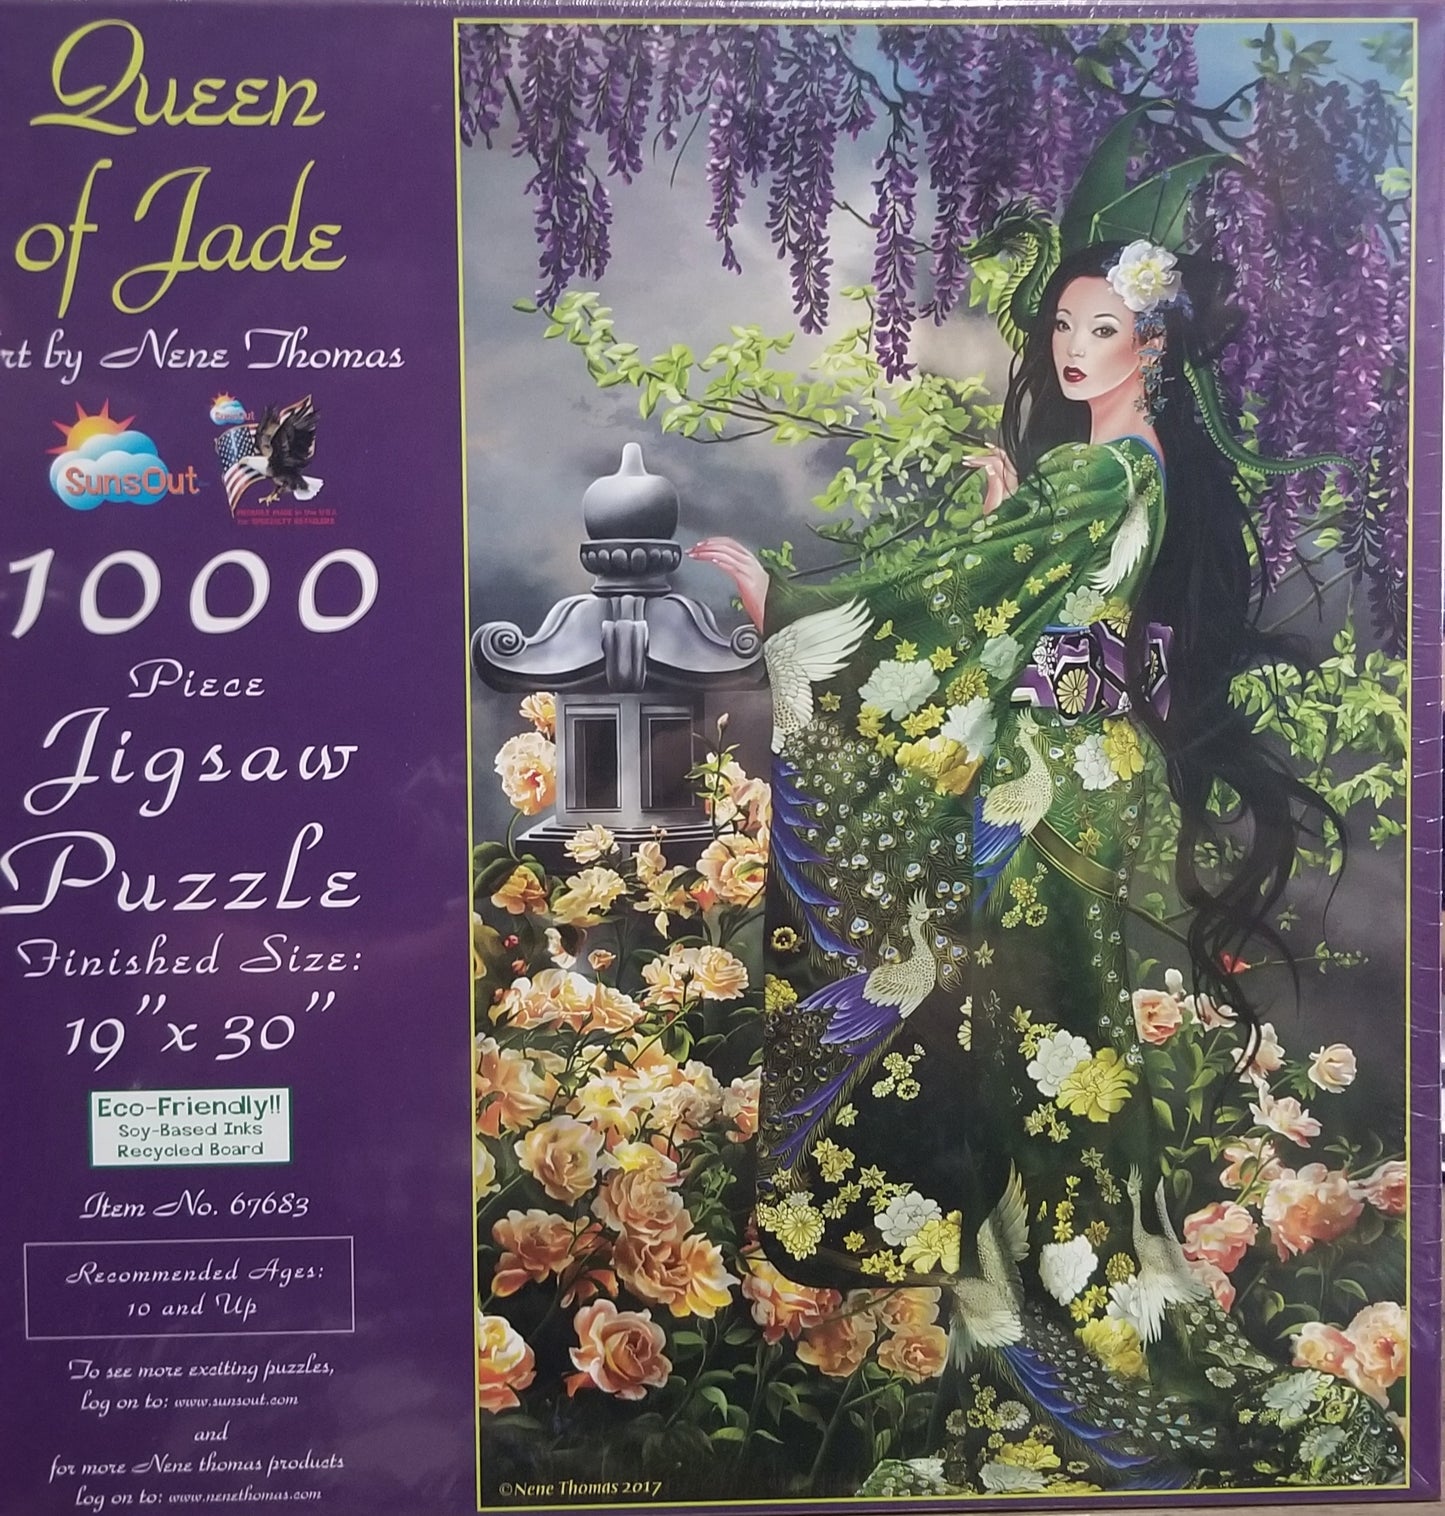 Queen of Jade by Nene Thomas, 1000 Piece Puzzle